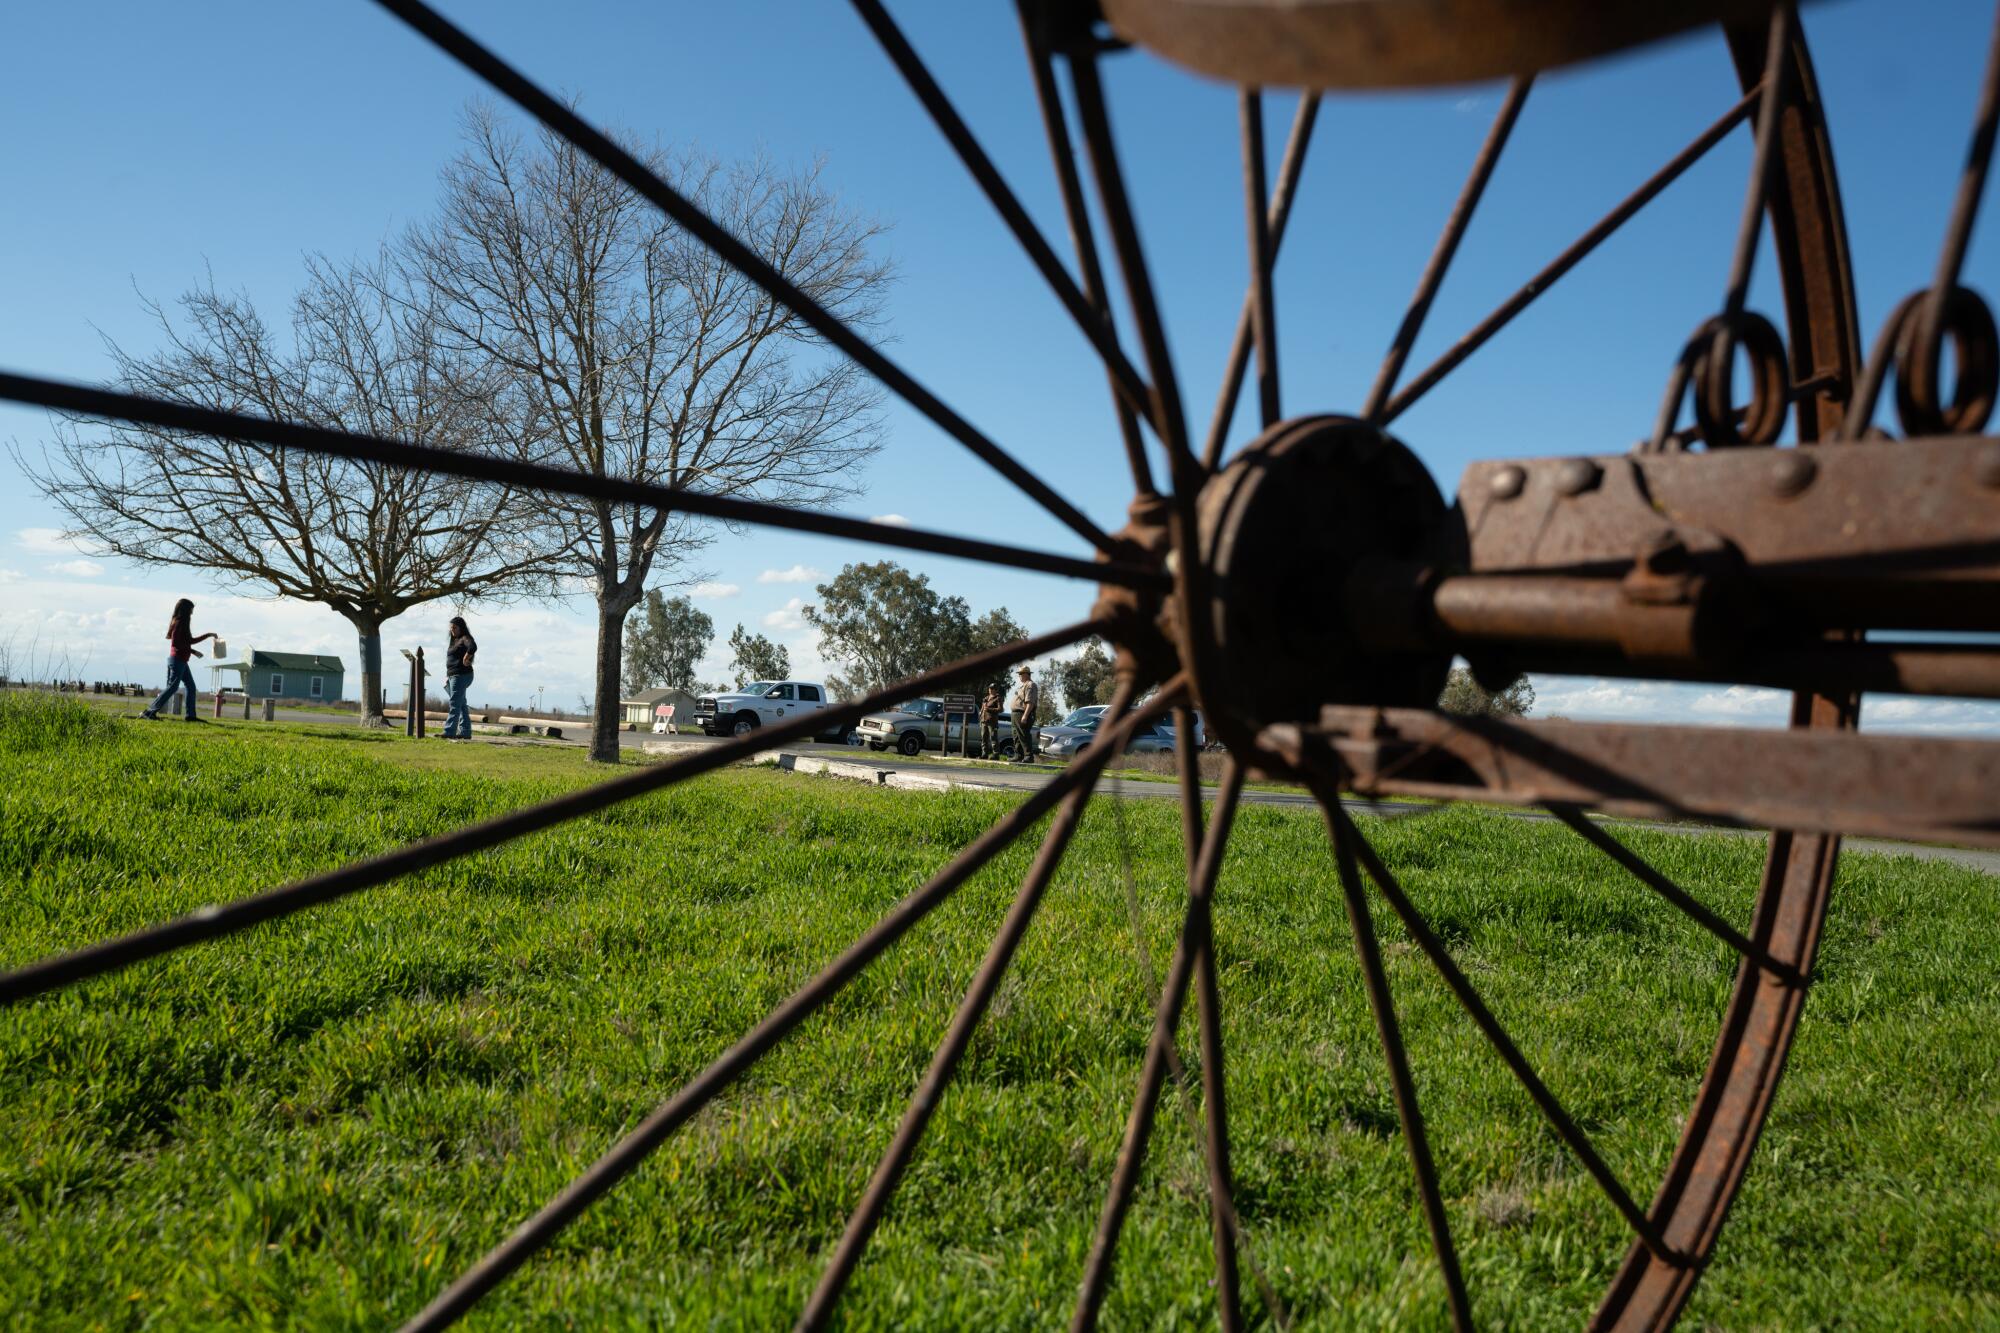 A rusted piece of farm equipment frames visitors to Colonel Allensworth State Historic Park.